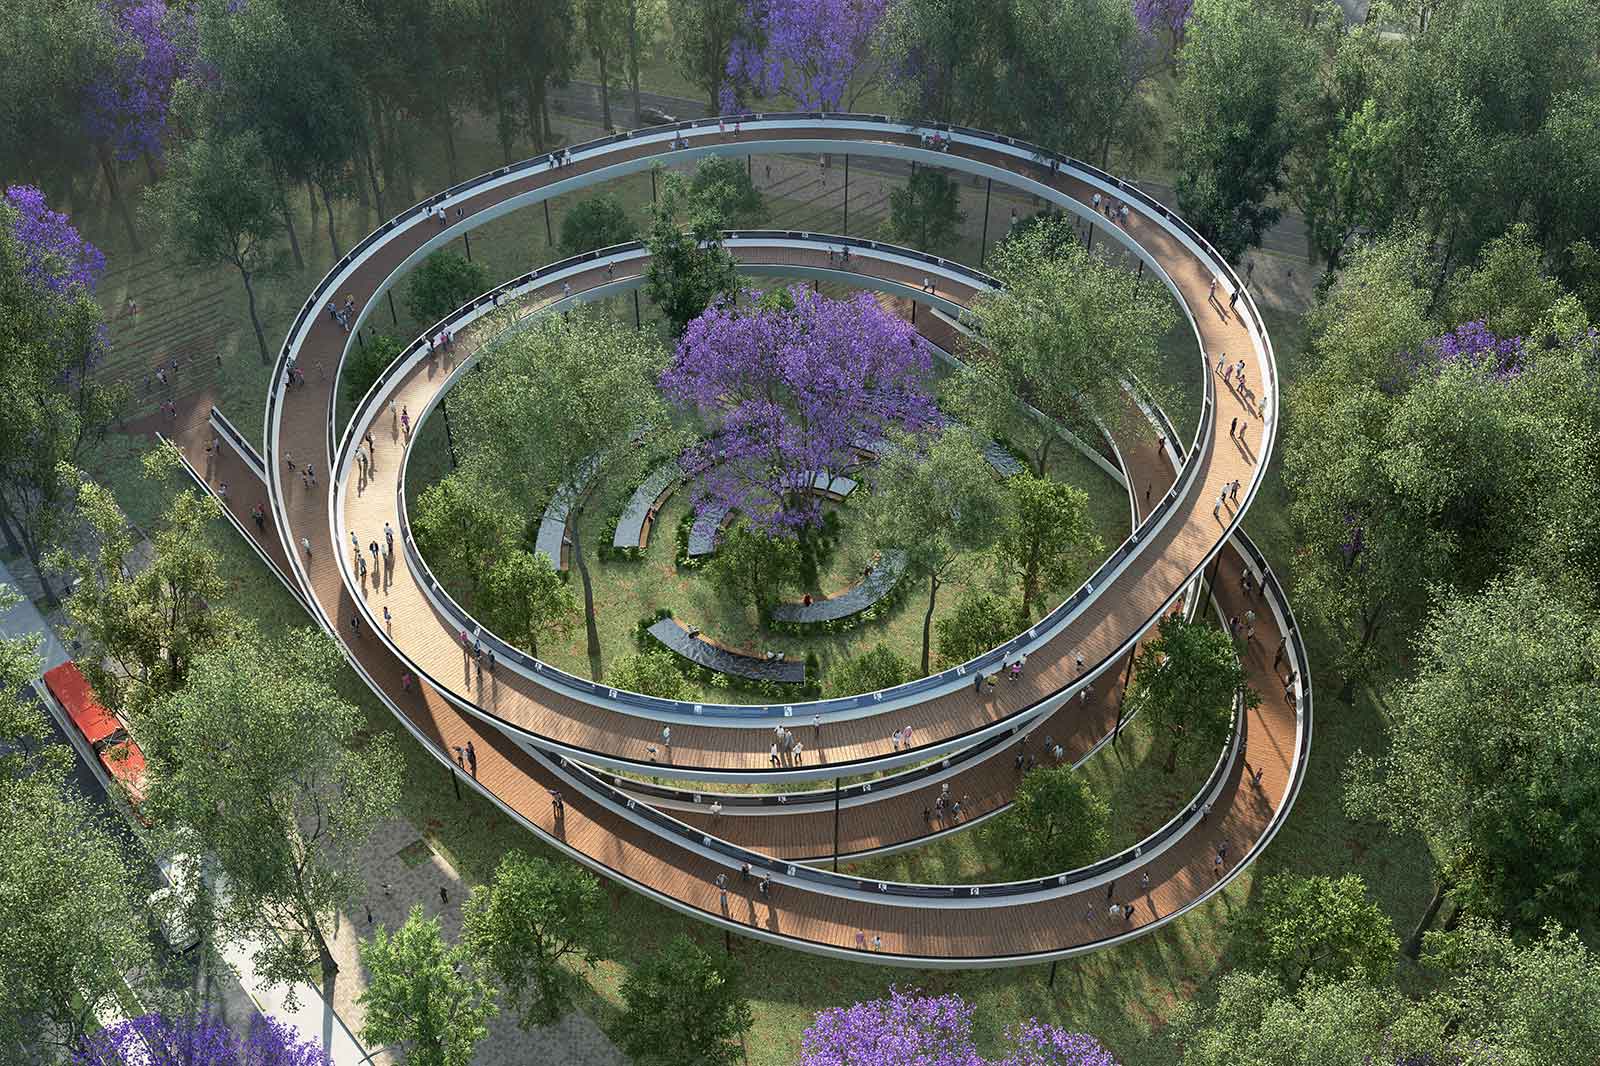 The Spiral of Silence Memorial, 2020